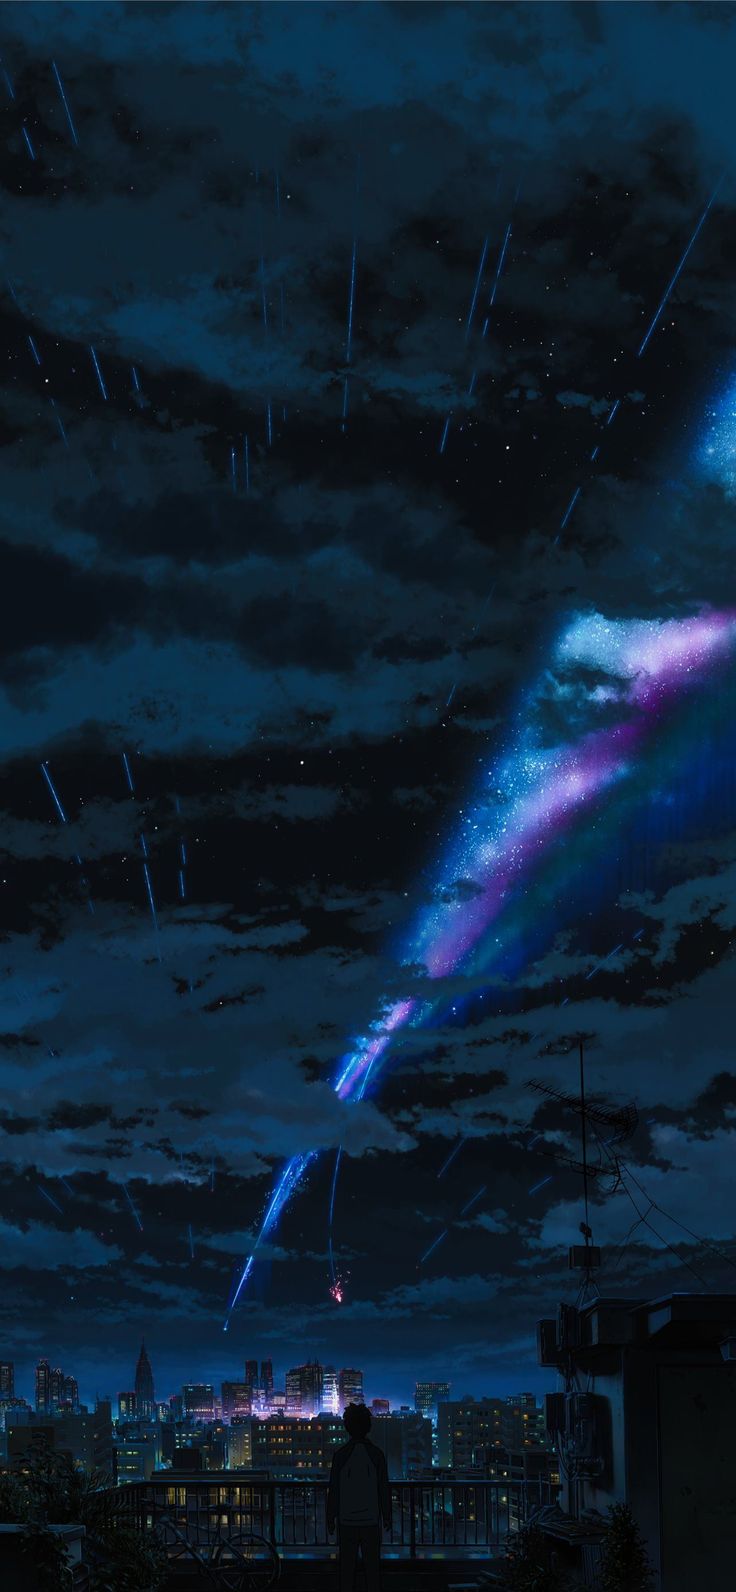 Free download the Comets Your Name Anime wallpaper , beaty your iphone. #Your Name #anime #Wallpaper. Your name anime, Anime wallpaper iphone, Your name wallpaper